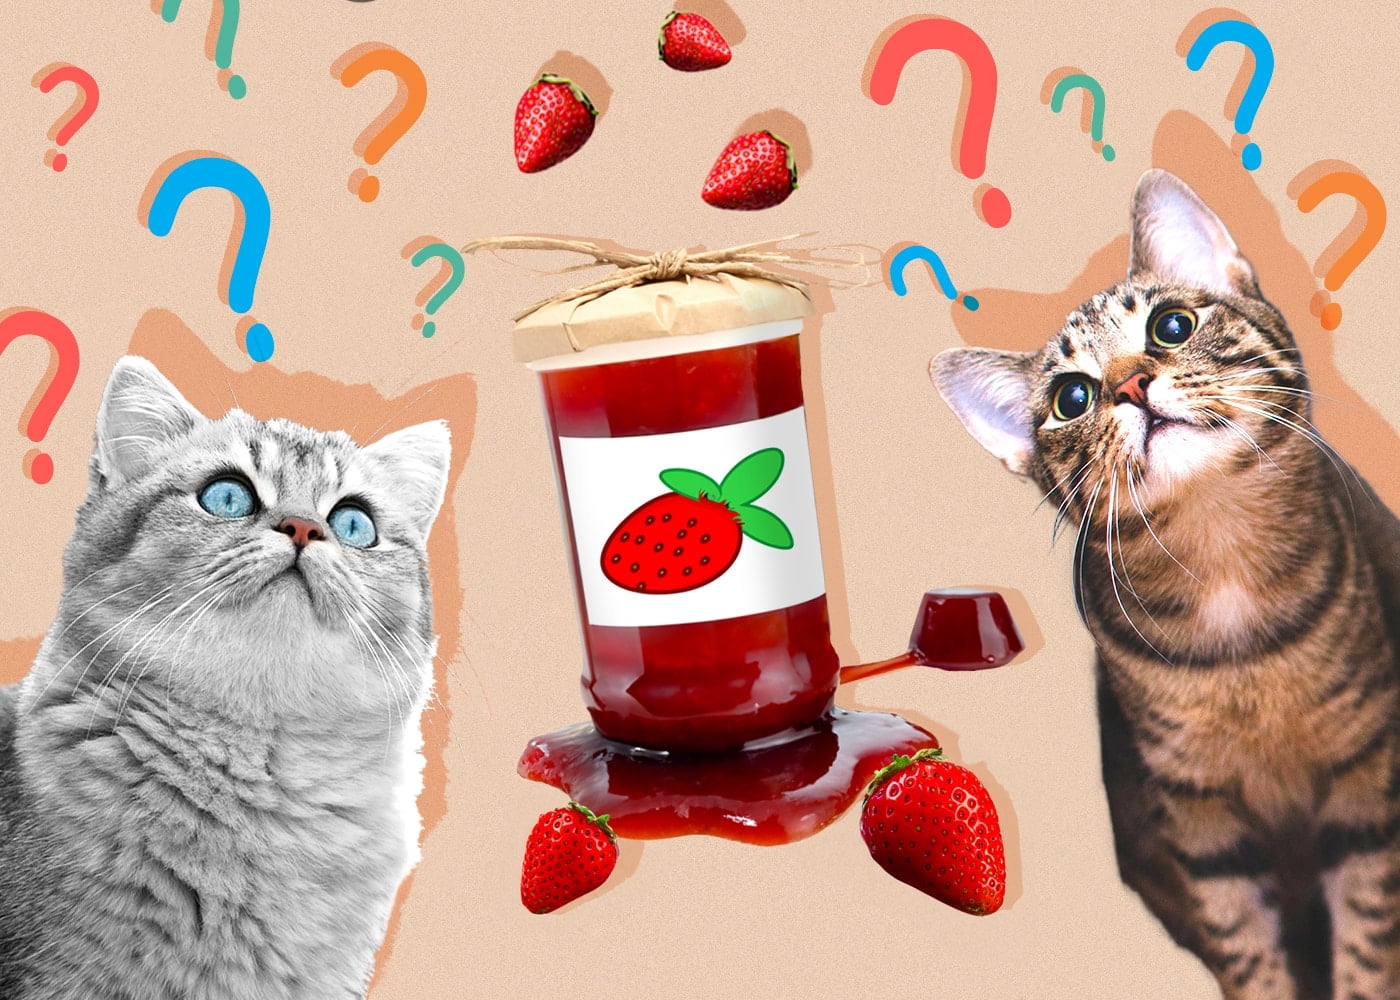 Can Cats Eat jelly-jam